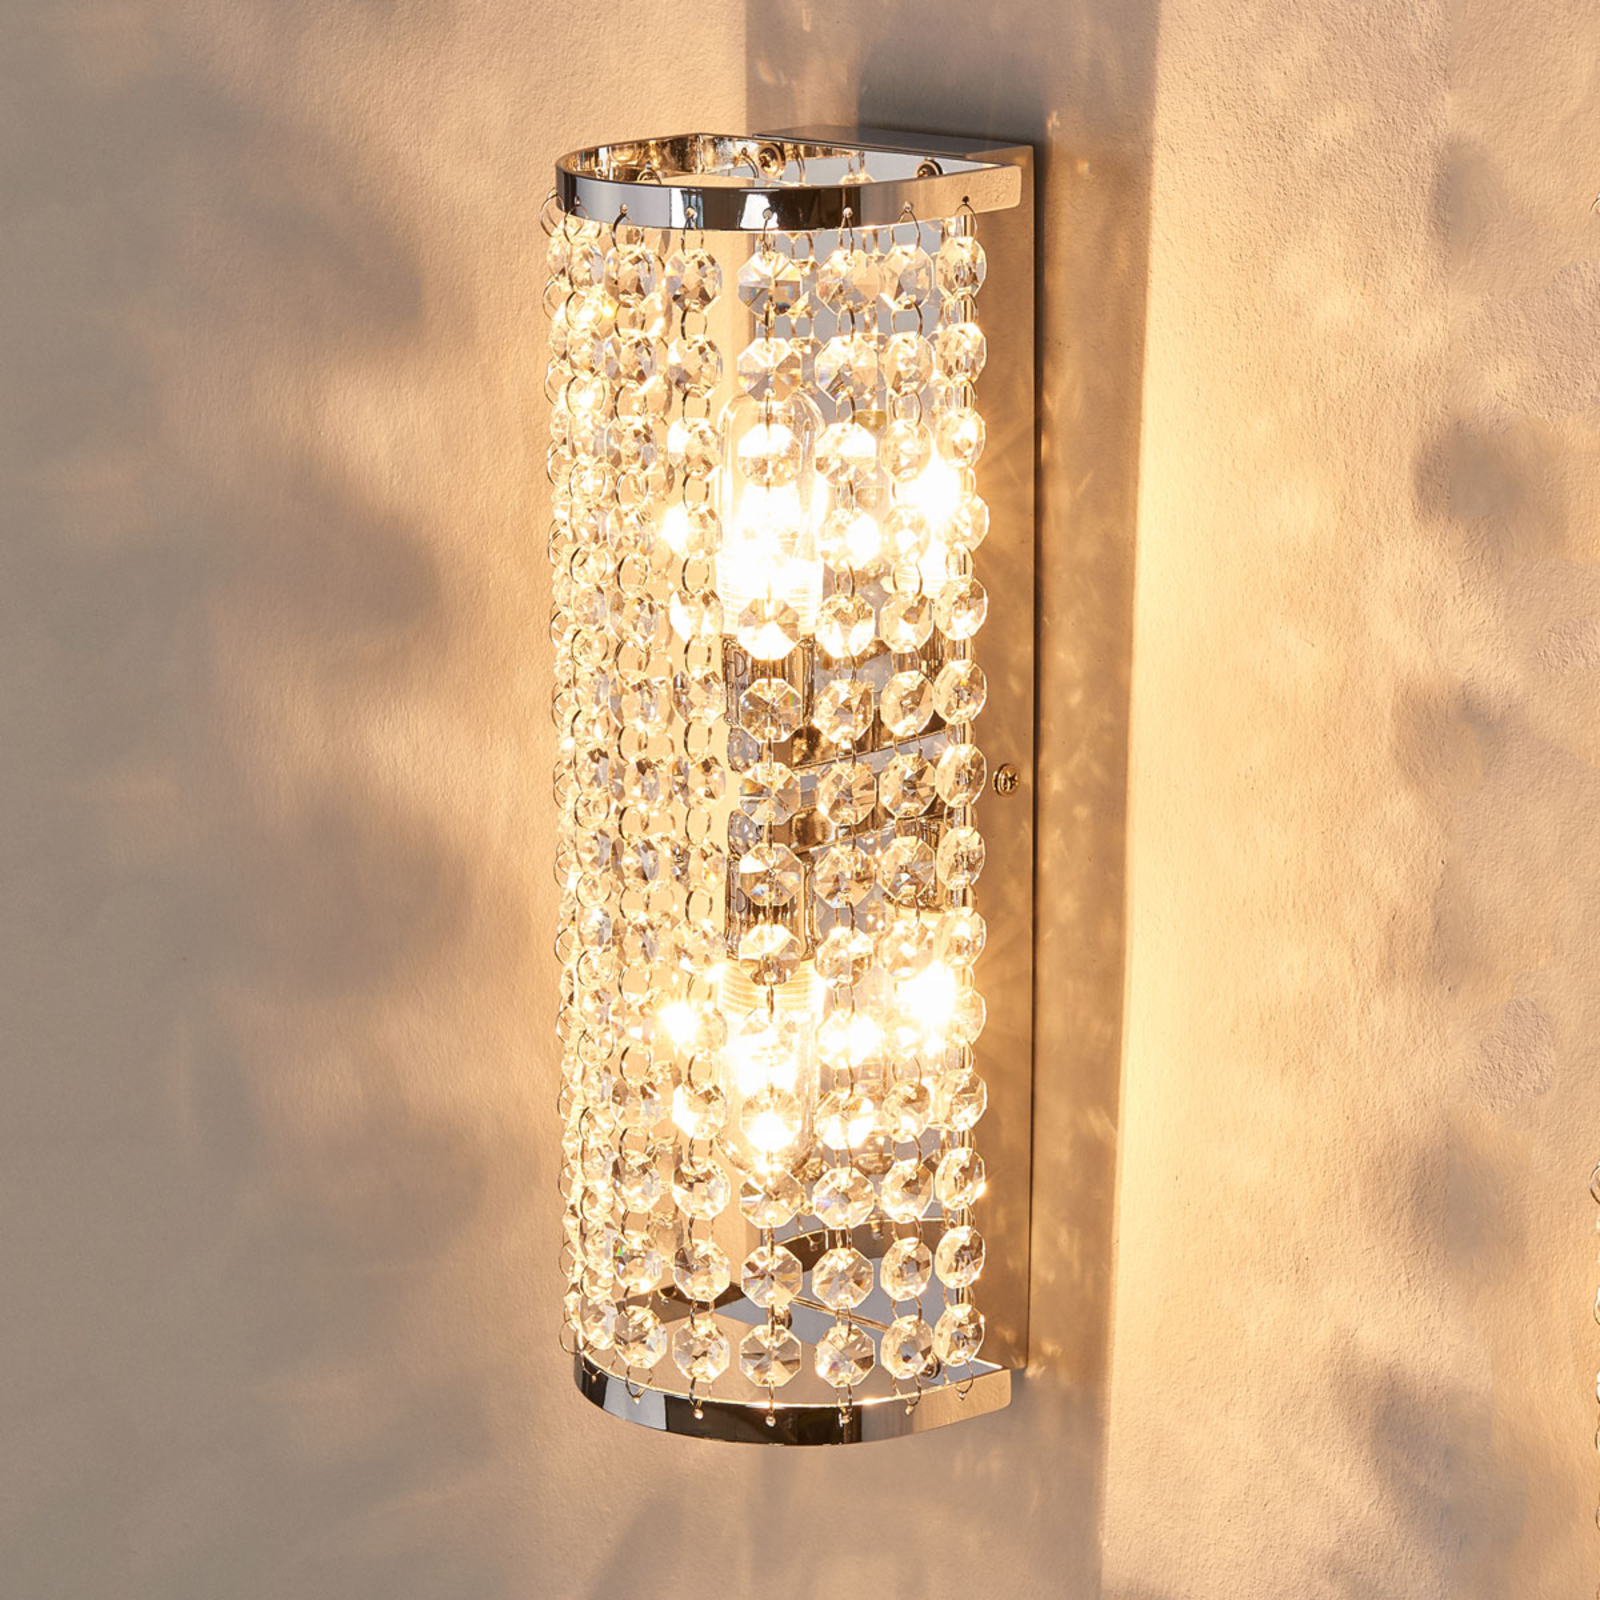 Also for the bathroom - Lysekil wall light, IP44